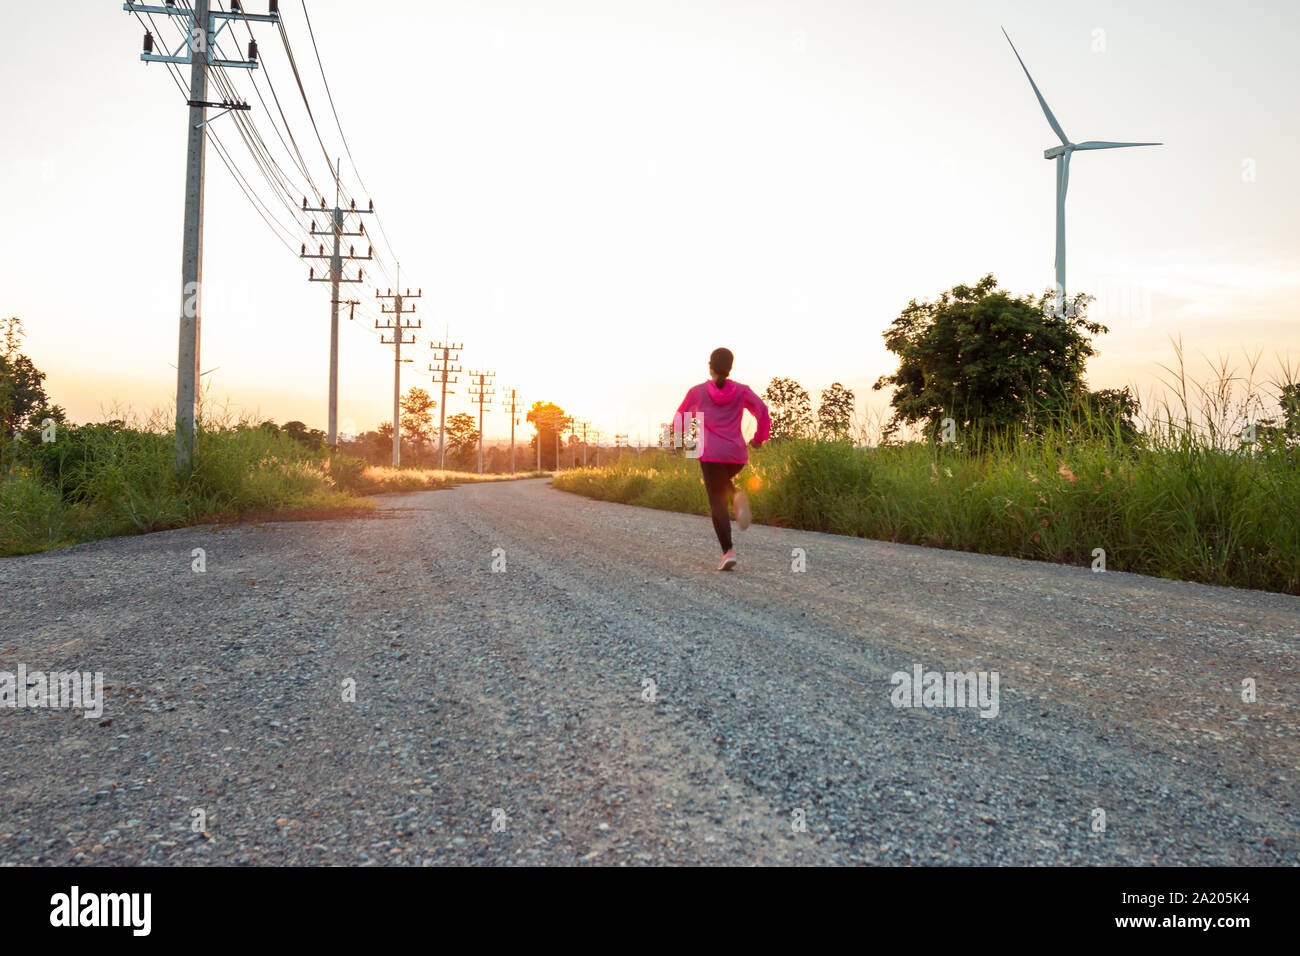 The evening sunset, The area of the wind turbine generates clean energy electricity, A woman is jogging on the road. Stock Photo